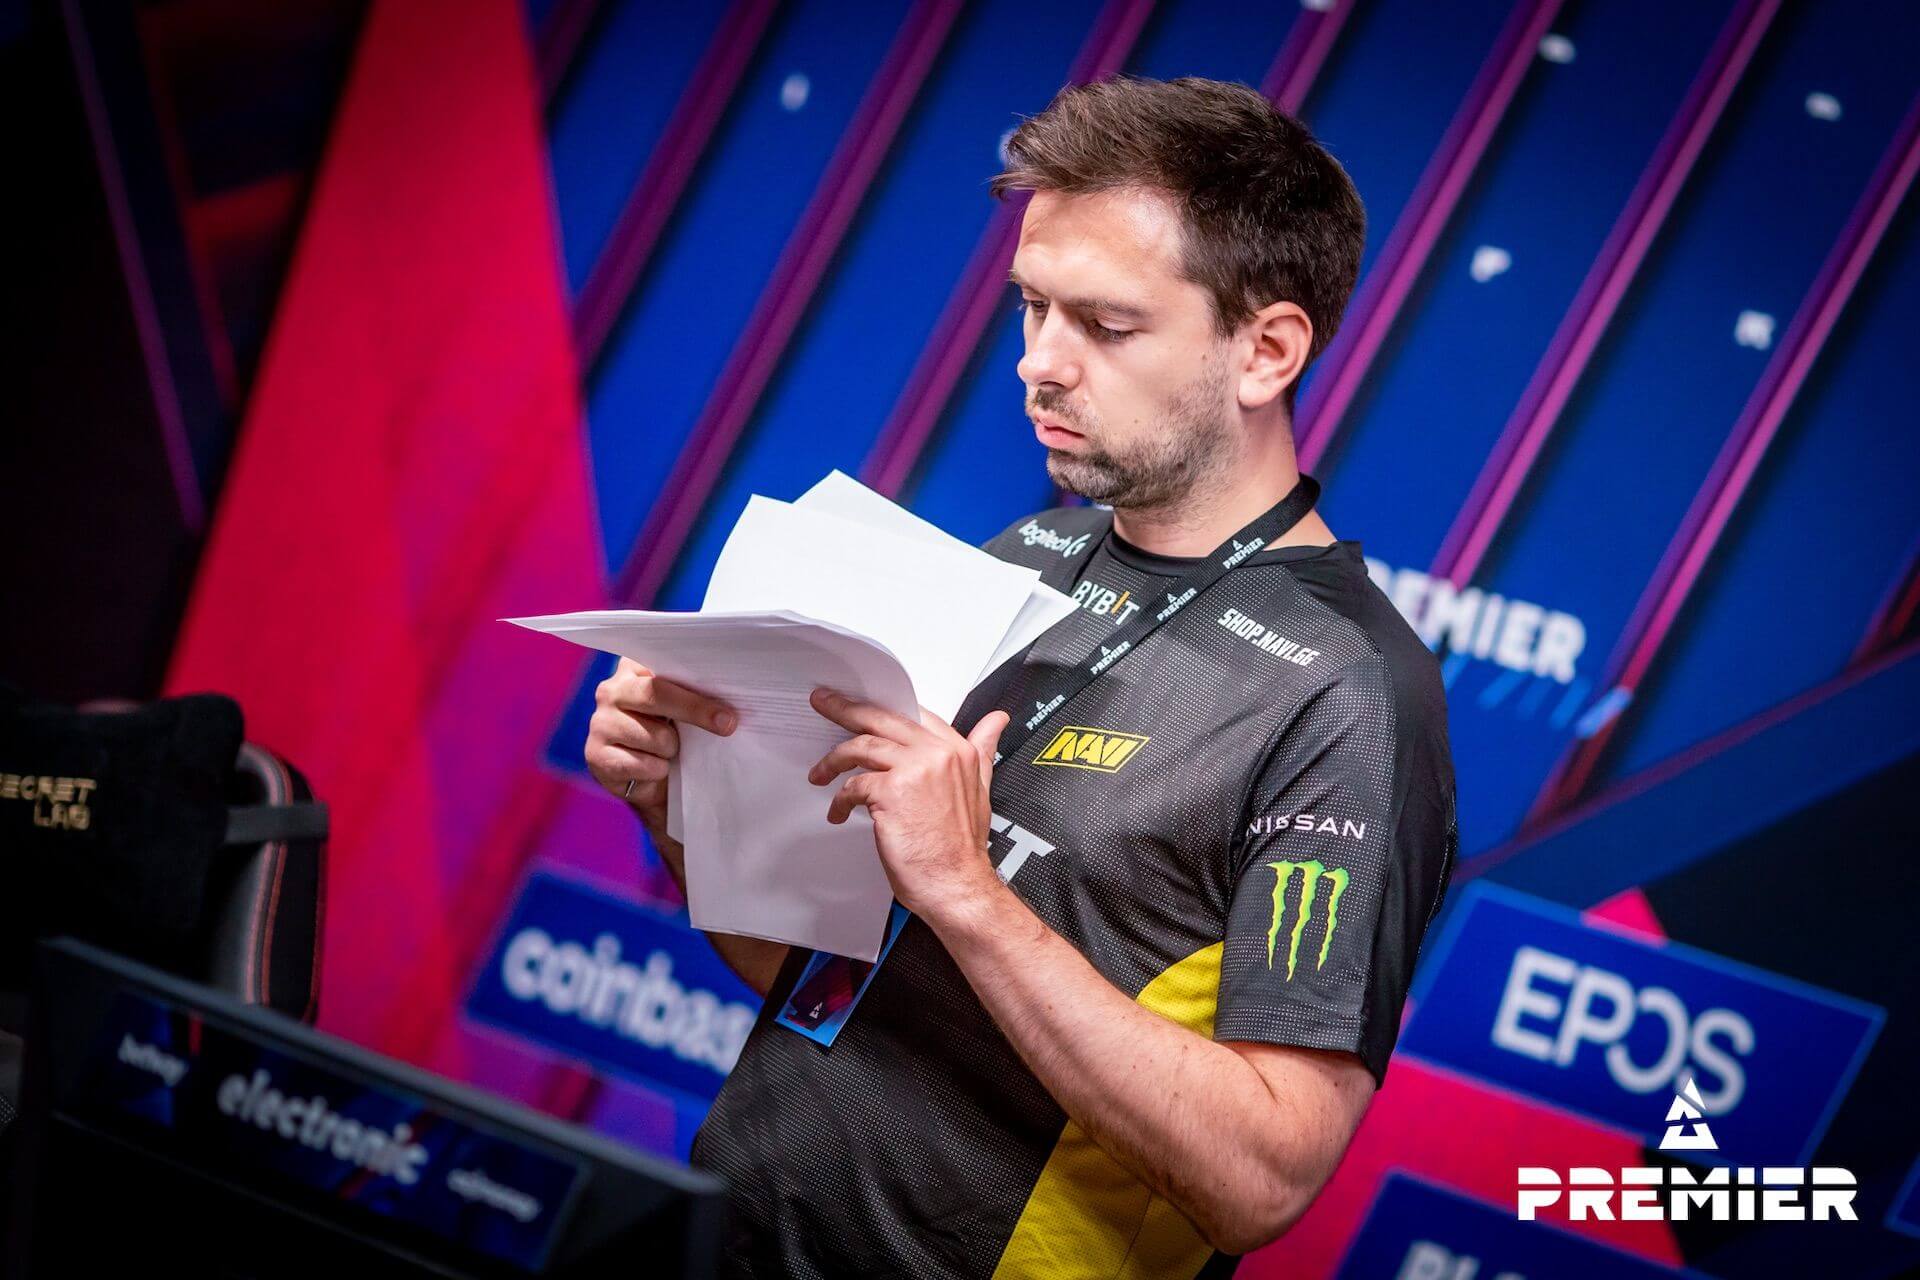 NAVI Is Not Sacking B1ad3-s1mple